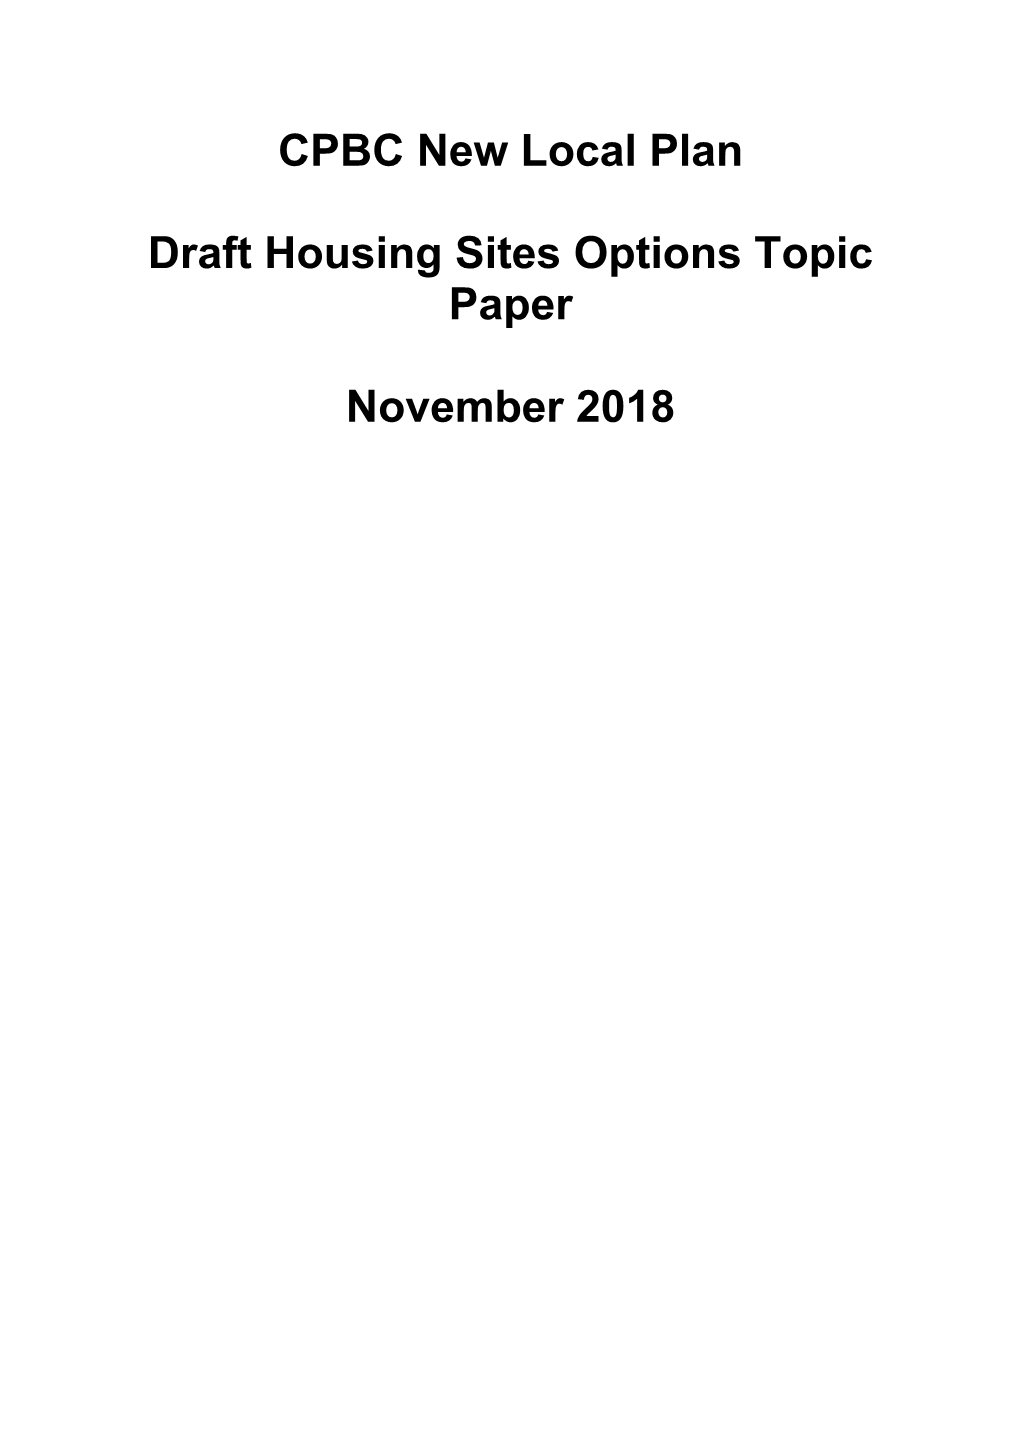 CPBC New Local Plan Draft Housing Sites Options Topic Paper